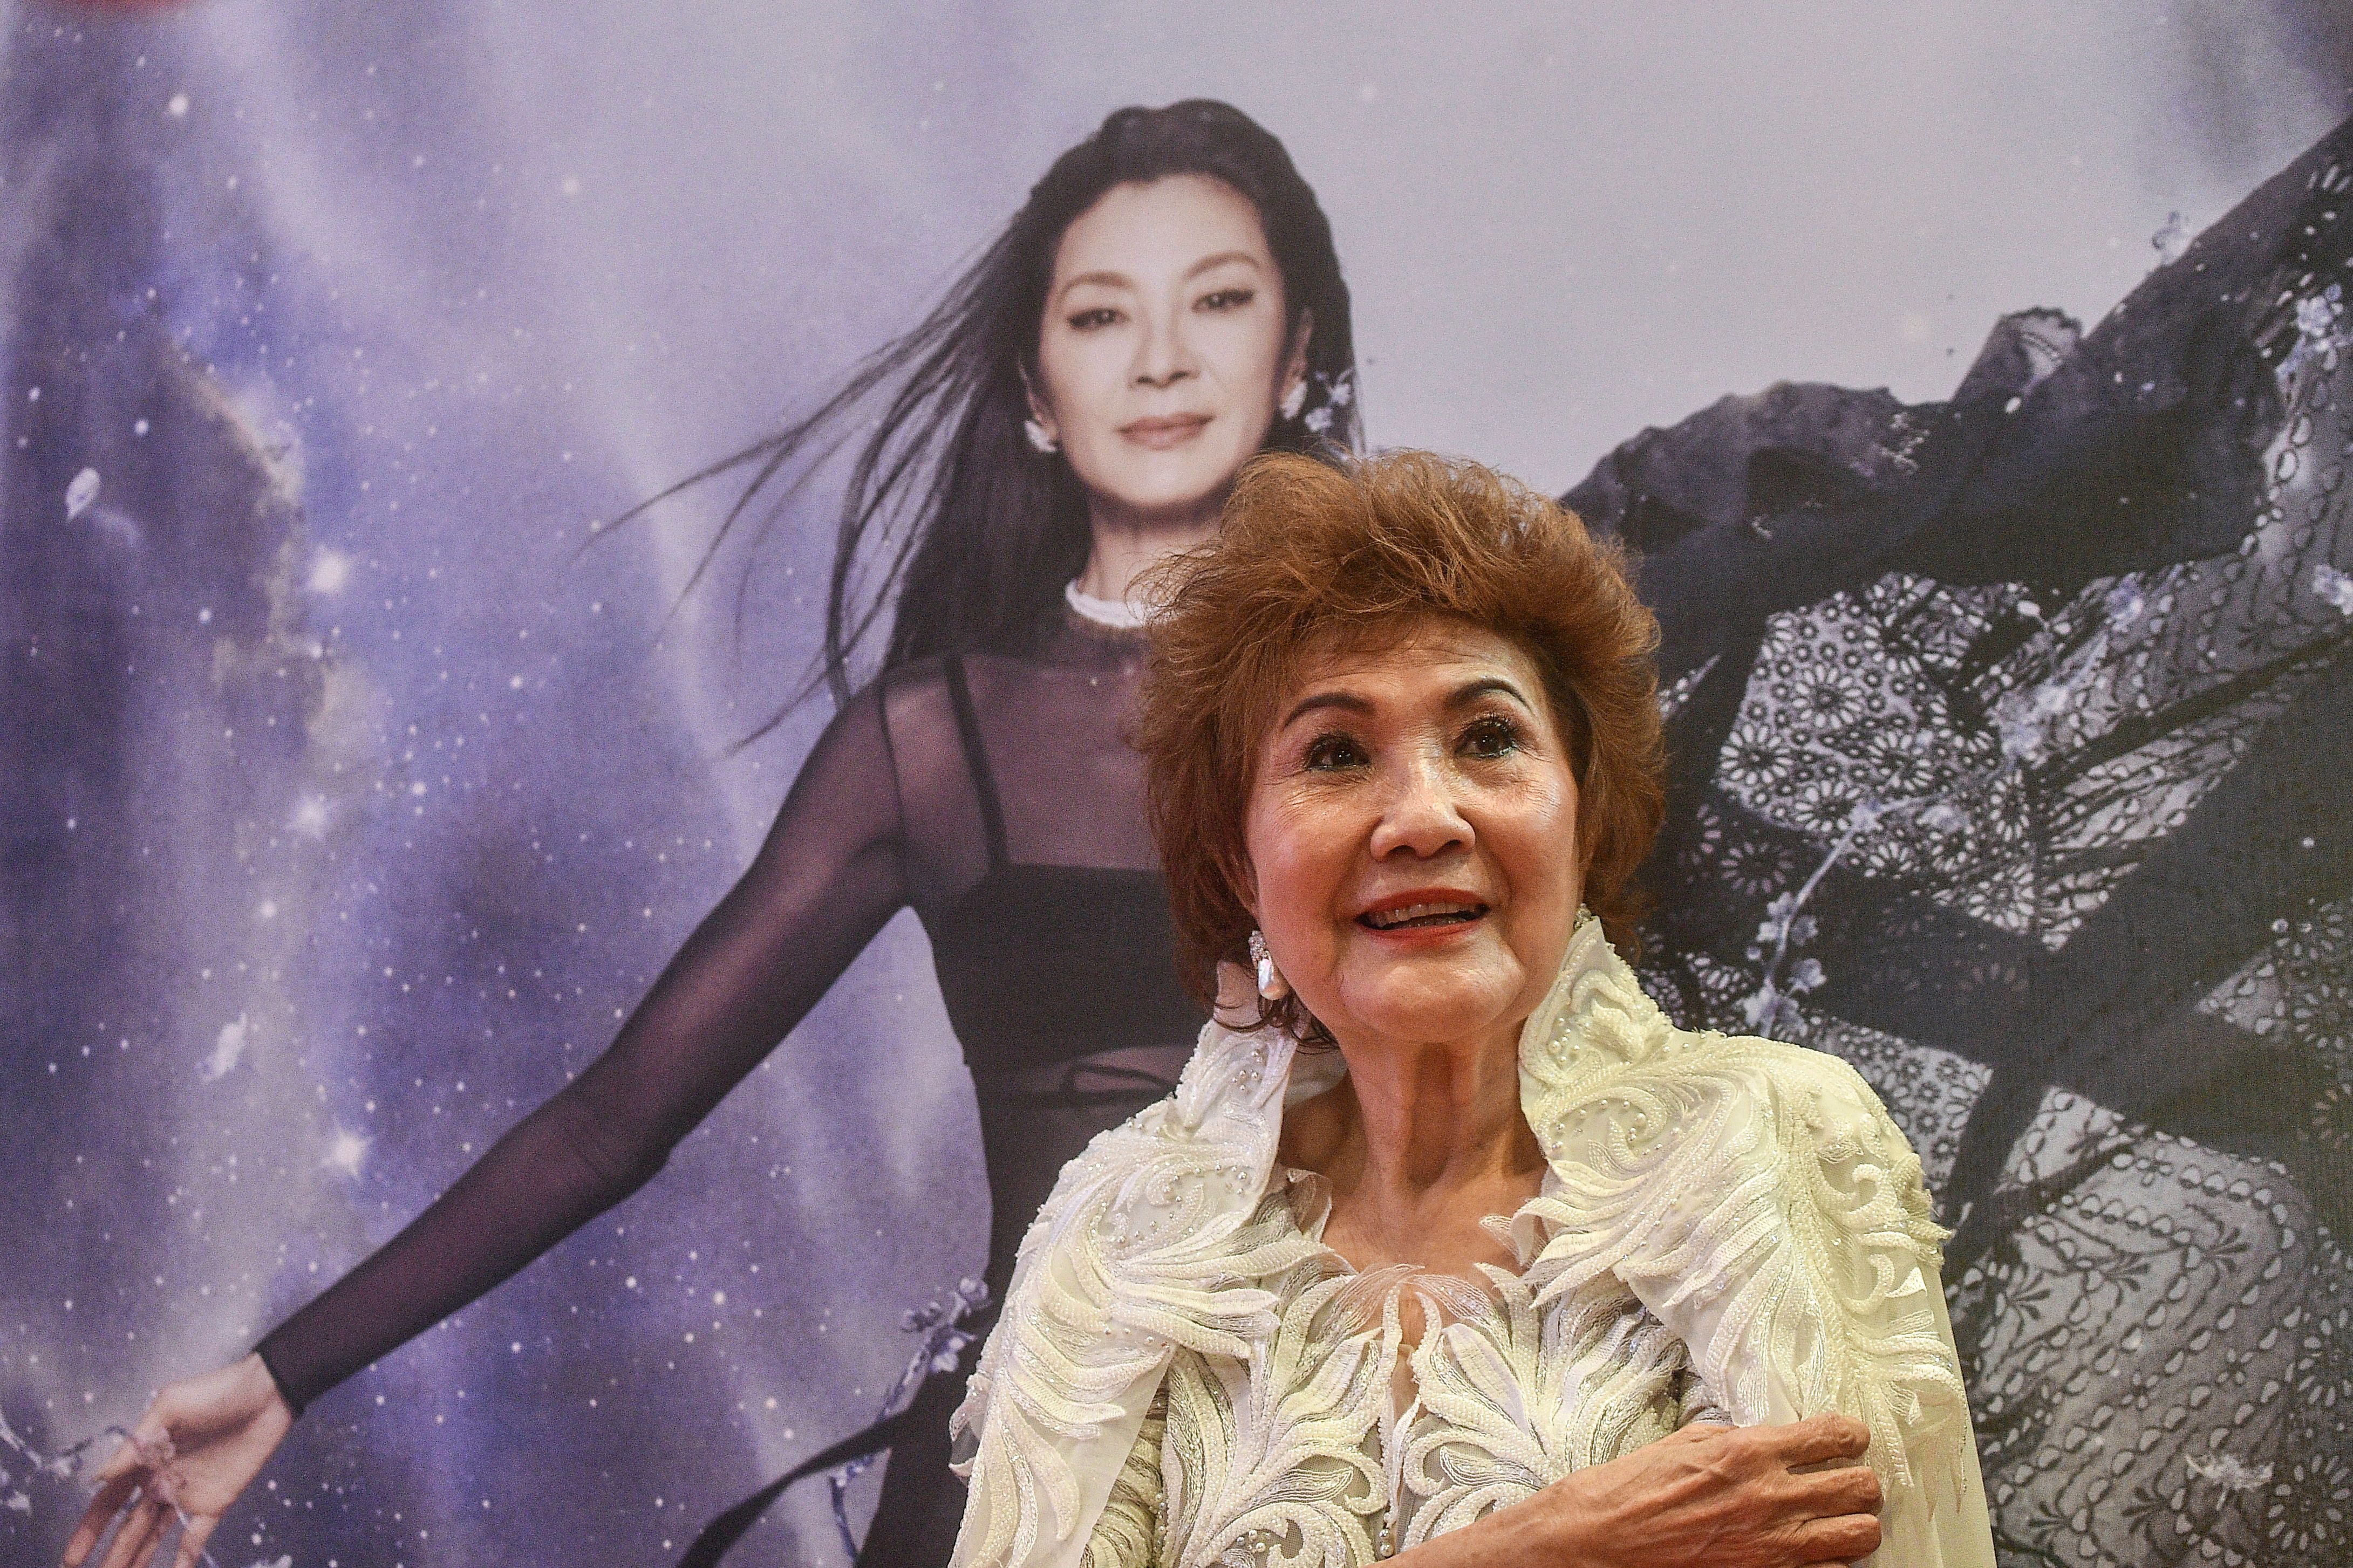 Janet Yeoh, mother of actress Michelle Yeoh, poses for photos after her daughter won the award for Best Actress in a Leading Role at the 95th Academy Awards in Los Angeles, at an event in Kuala Lumpur on March 13, 2023 | Source: Getty Images